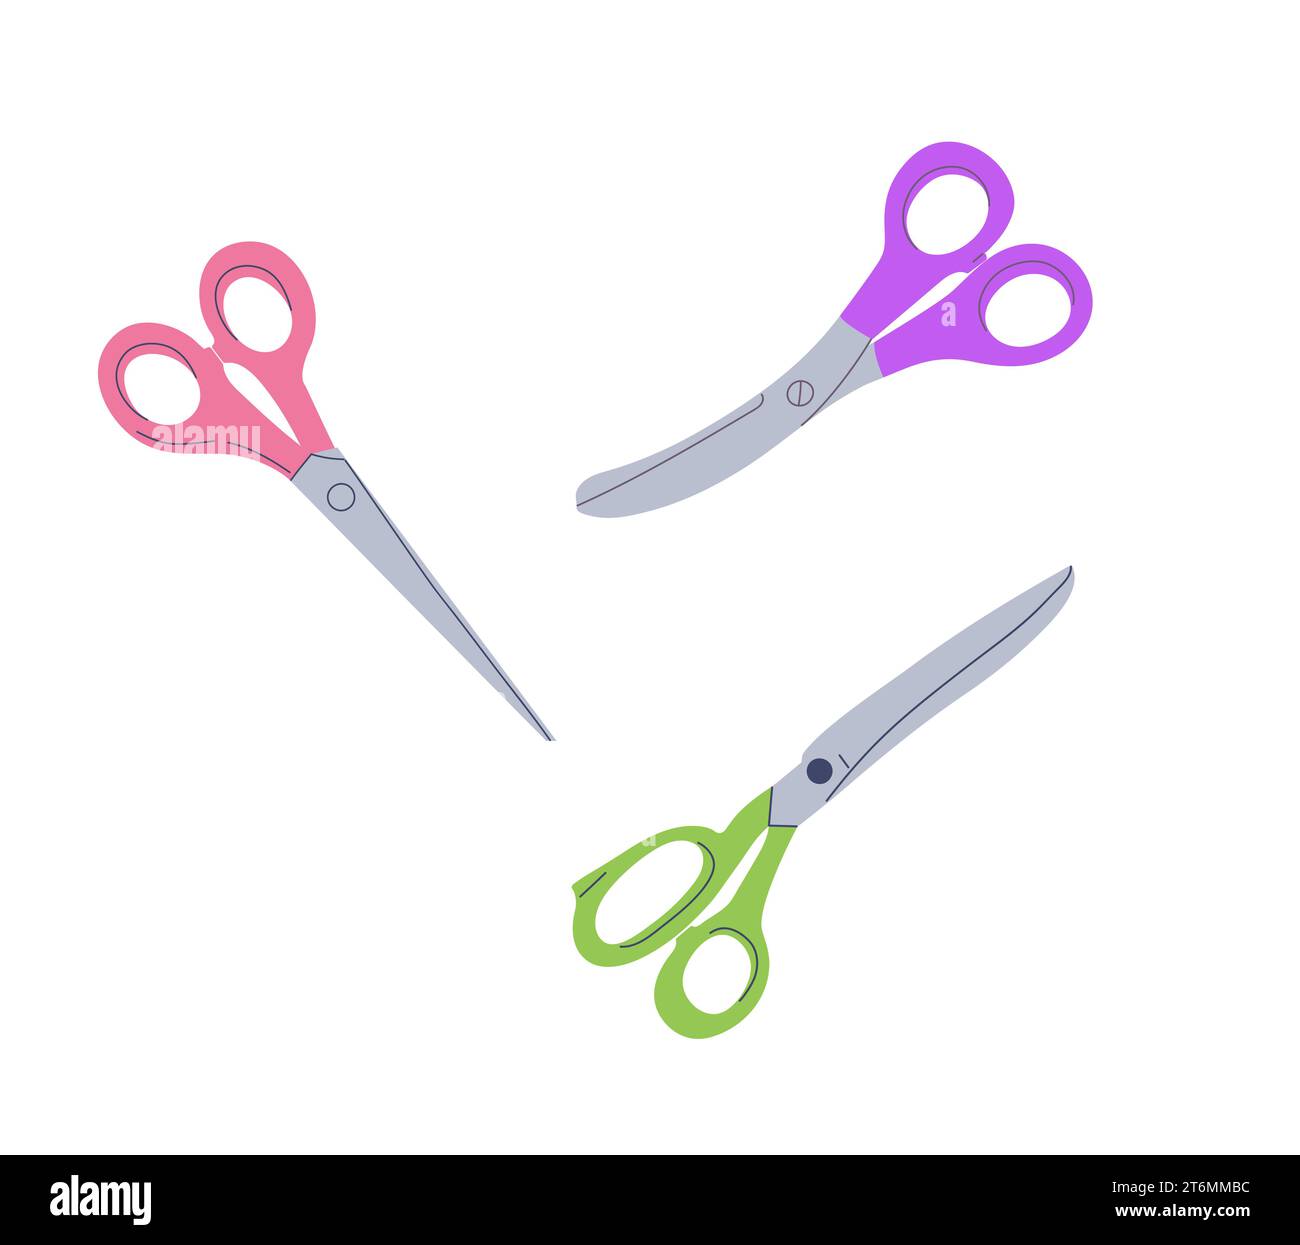 Cute Colorful Zigzag Scissors With Changeable Blade On White Fur Background  Stock Photo - Download Image Now - iStock